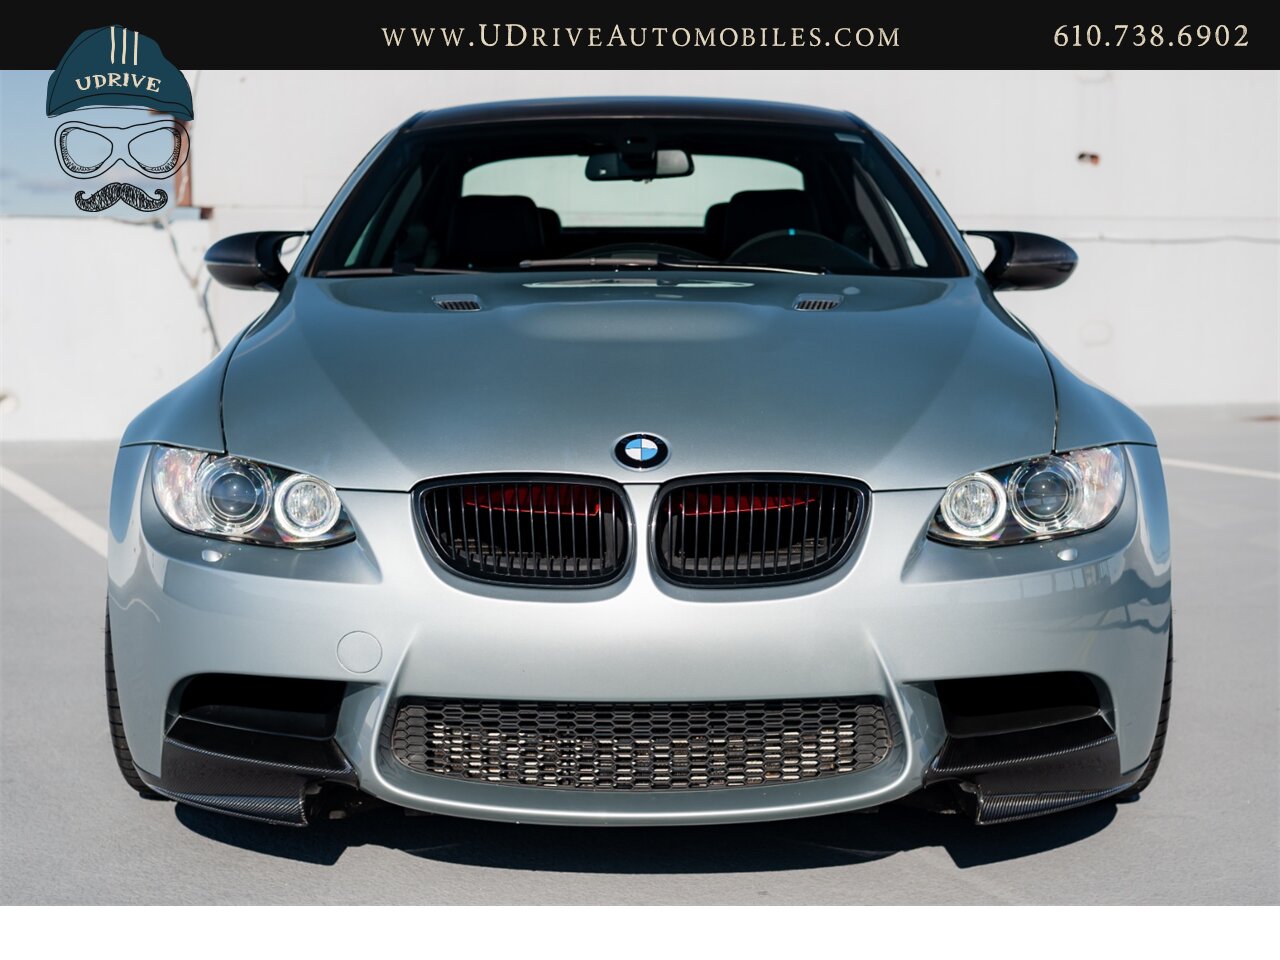 2008 BMW M3 Dinan S3-R M3 1 of 36 Produced DCT  1 Owner Full Service History 4.6L Stroker V8 - Photo 11 - West Chester, PA 19382